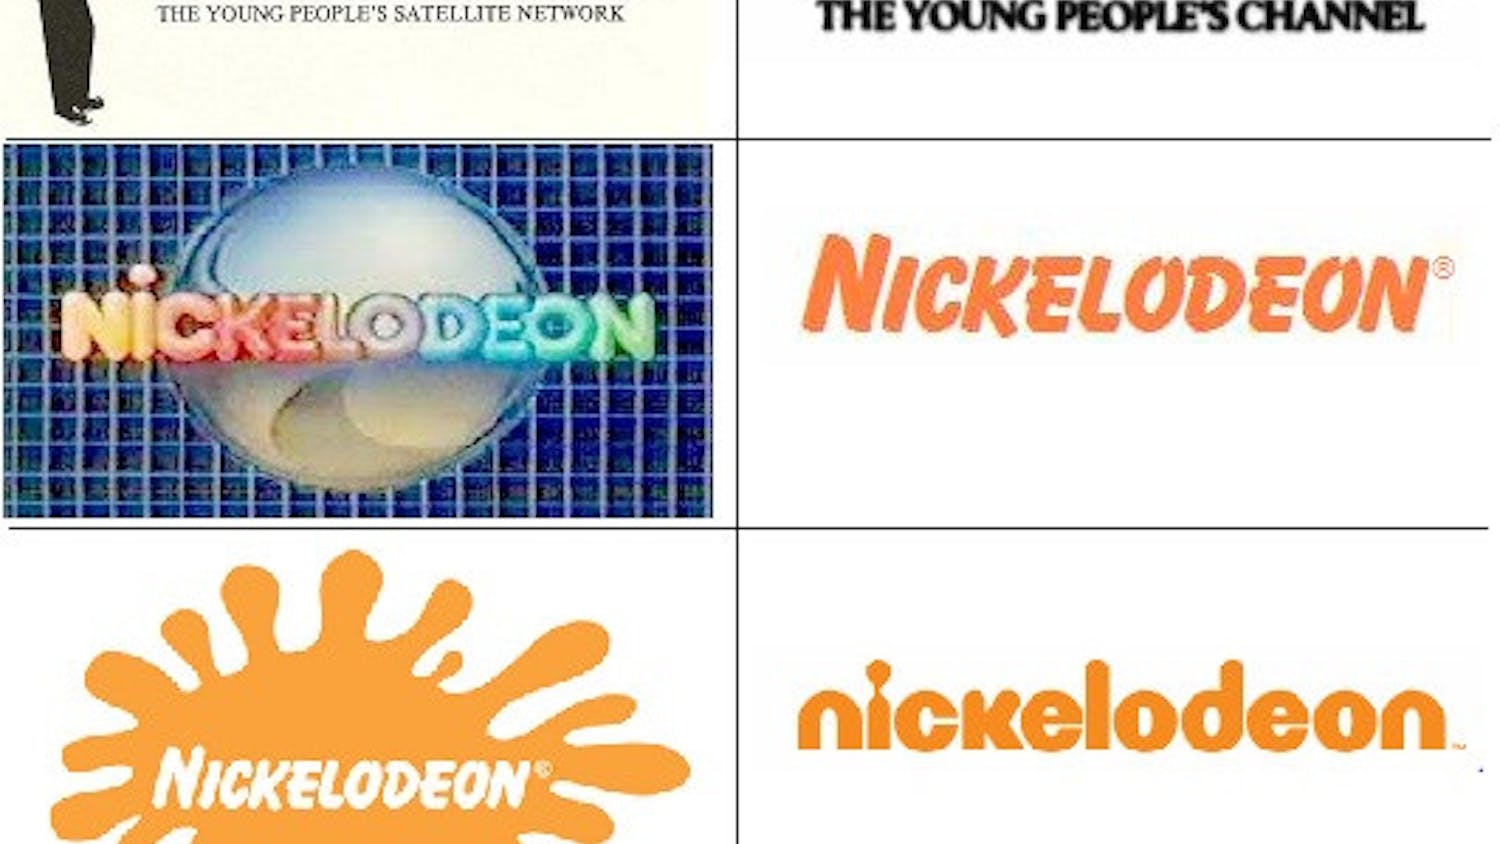 The evolution of the Nickelodeon logo, from 1979 to the present day.